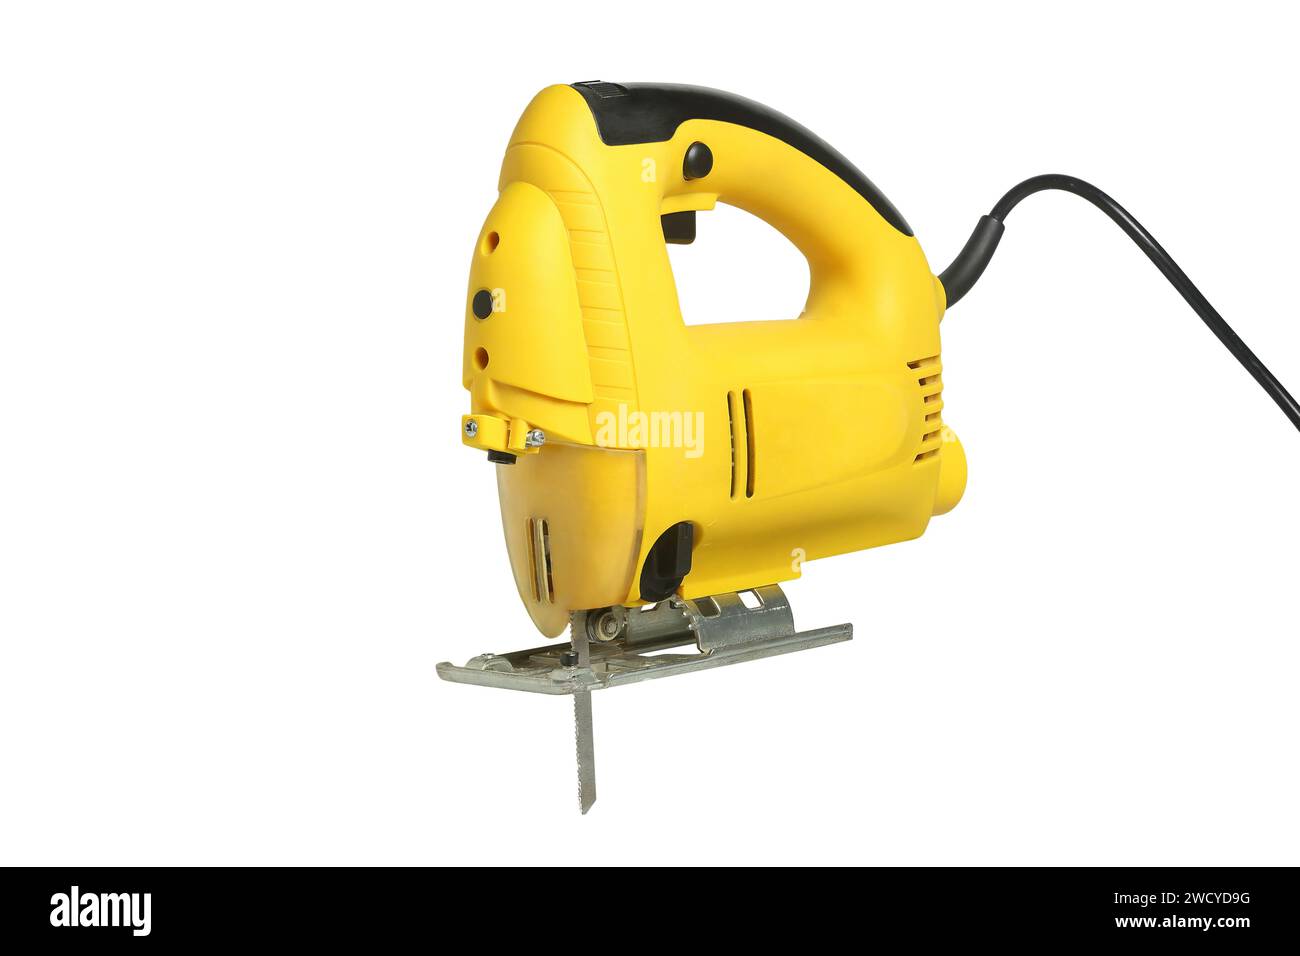 electric yellow jig saw isolated Stock Photo